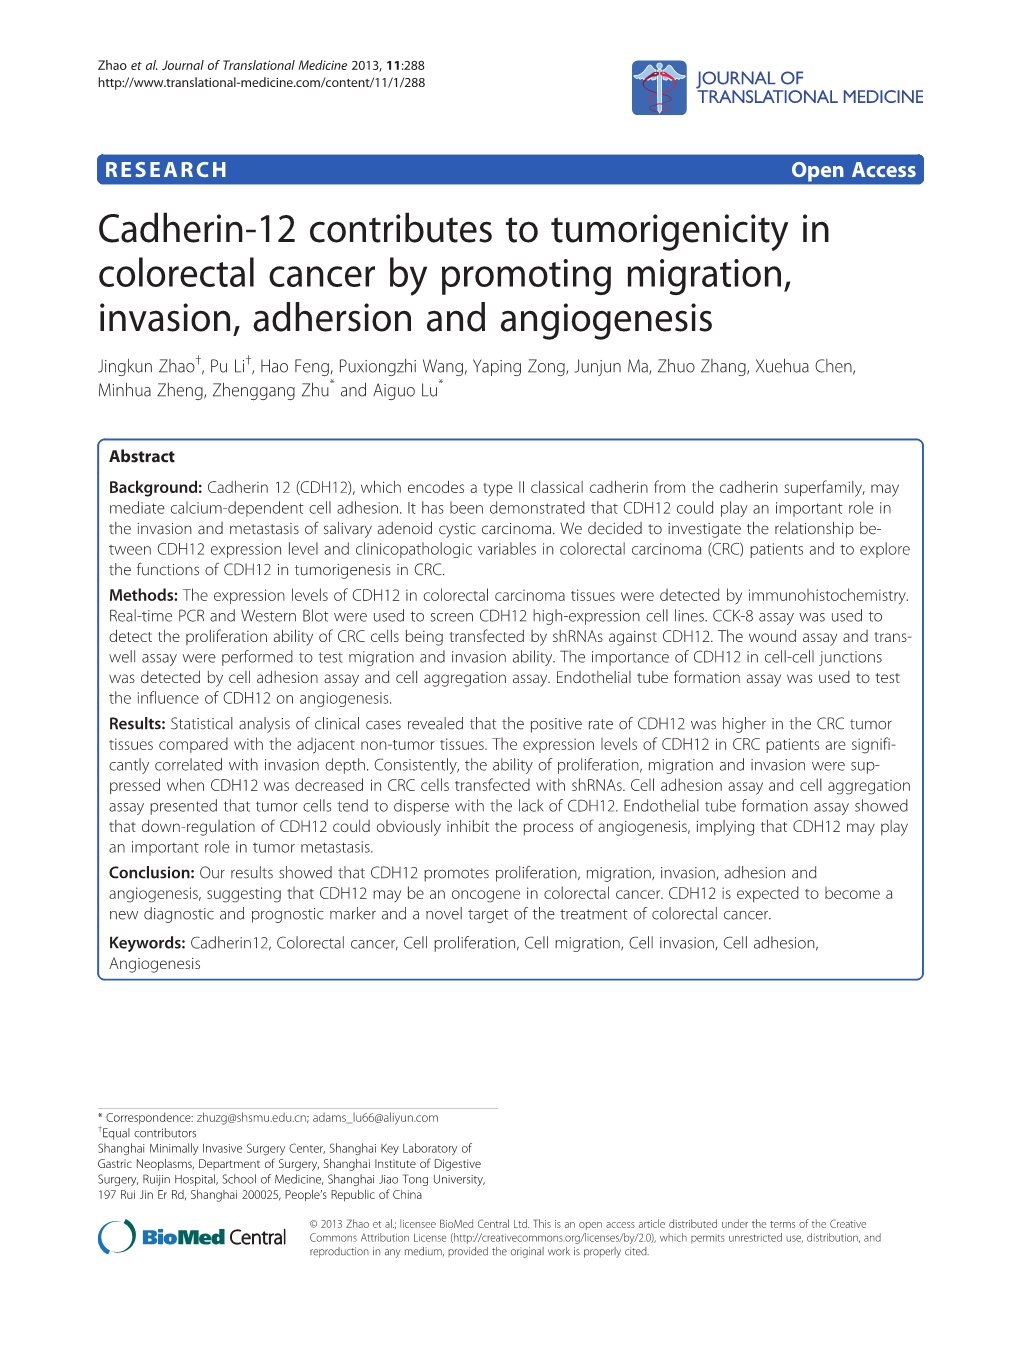 Cadherin-12 Contributes to Tumorigenicity in Colorectal Cancer